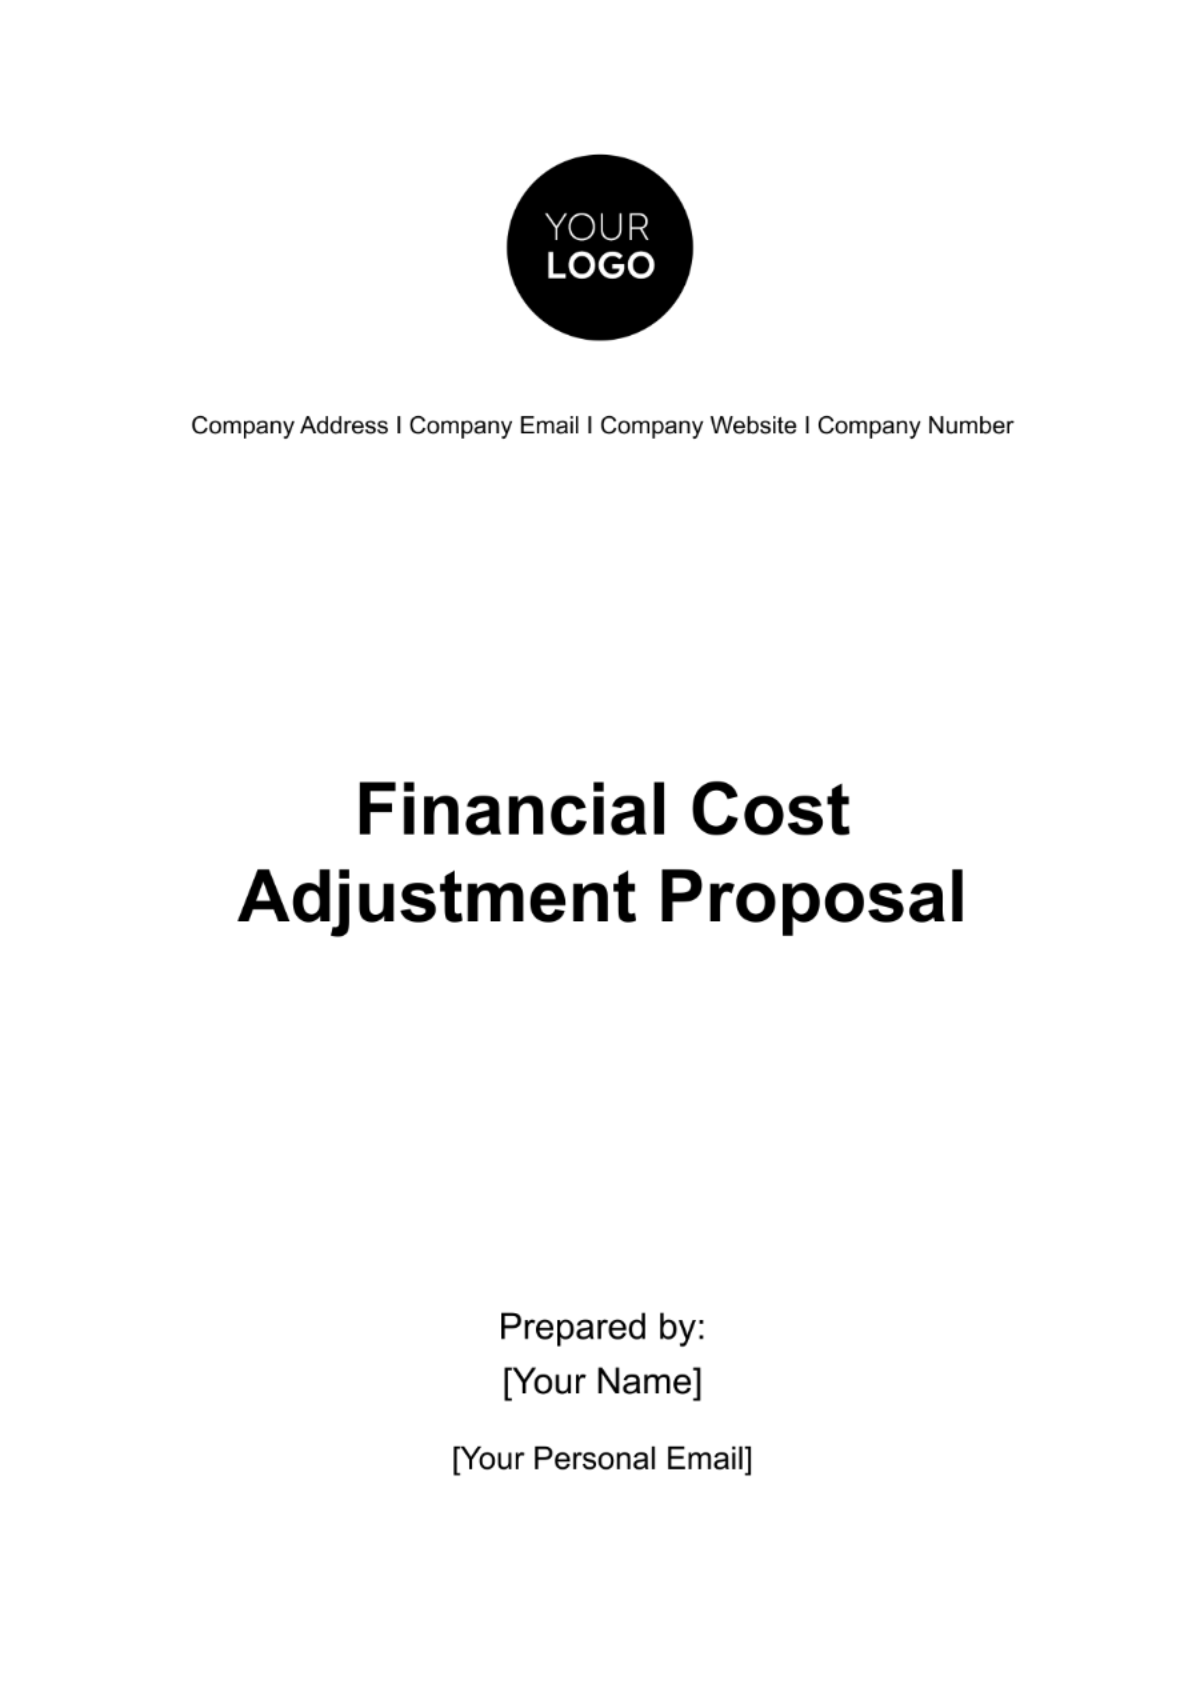 Financial Cost Adjustment Proposal Template